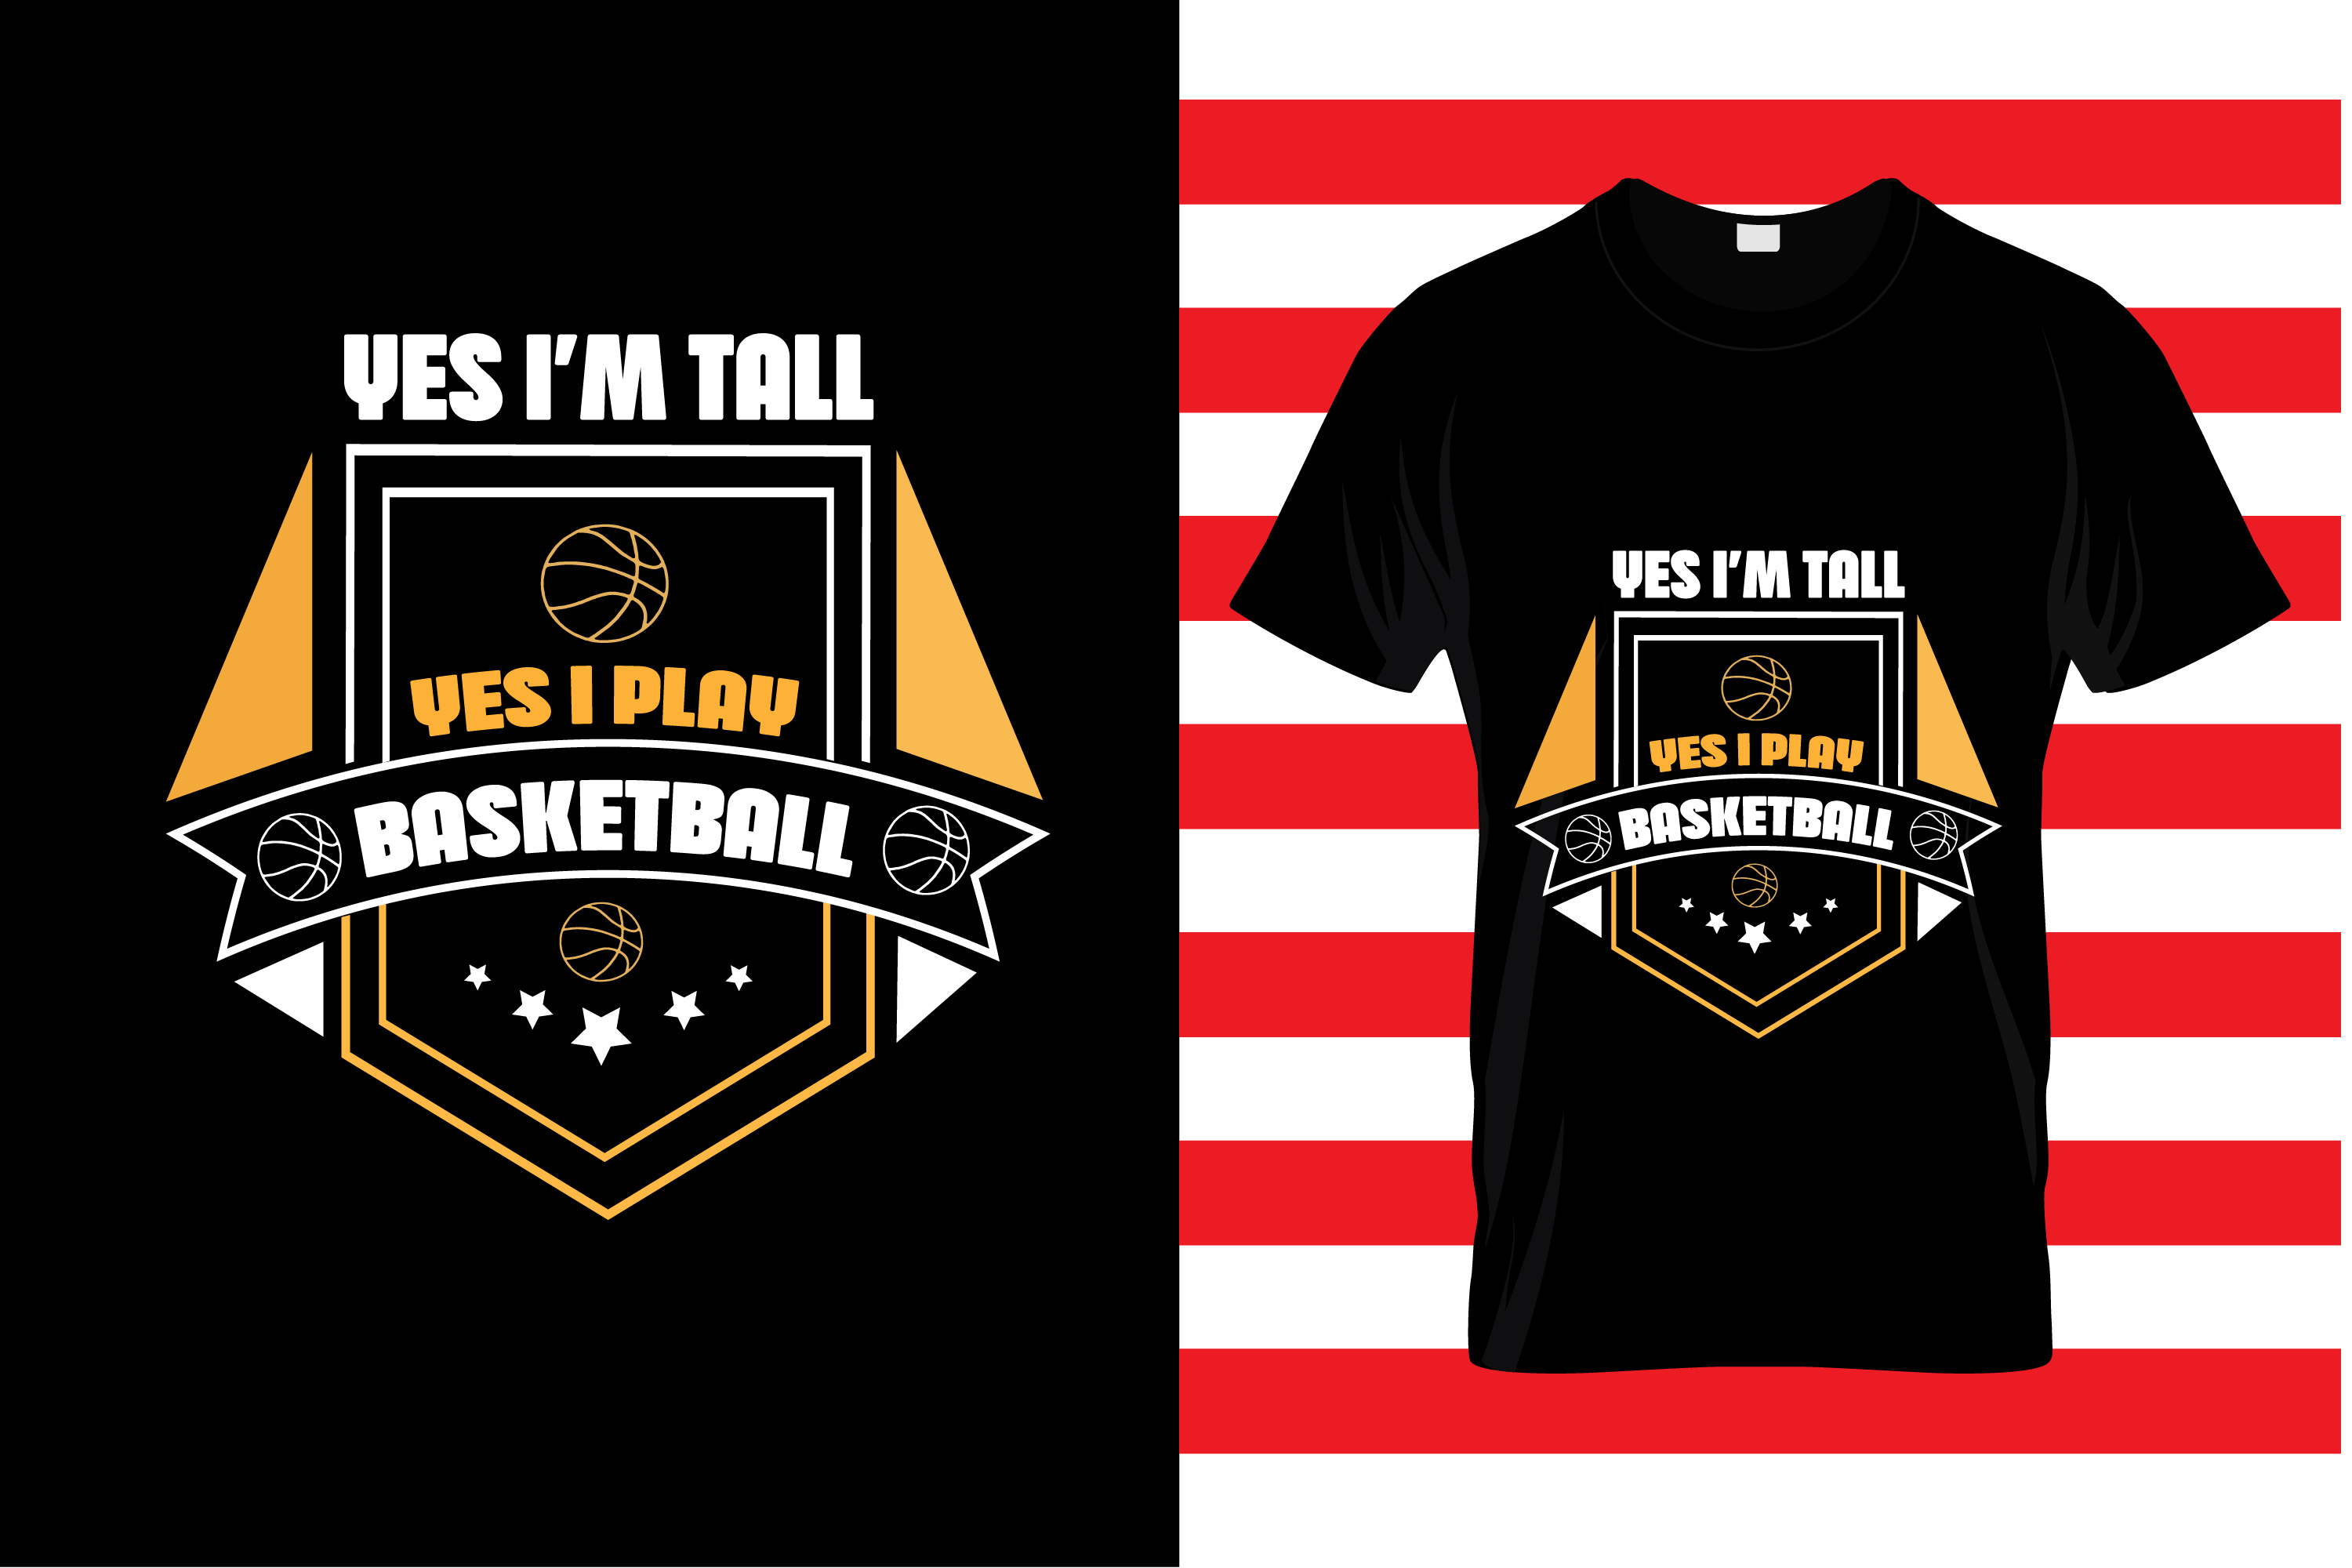 Basketball Jerseys designs, themes, templates and downloadable